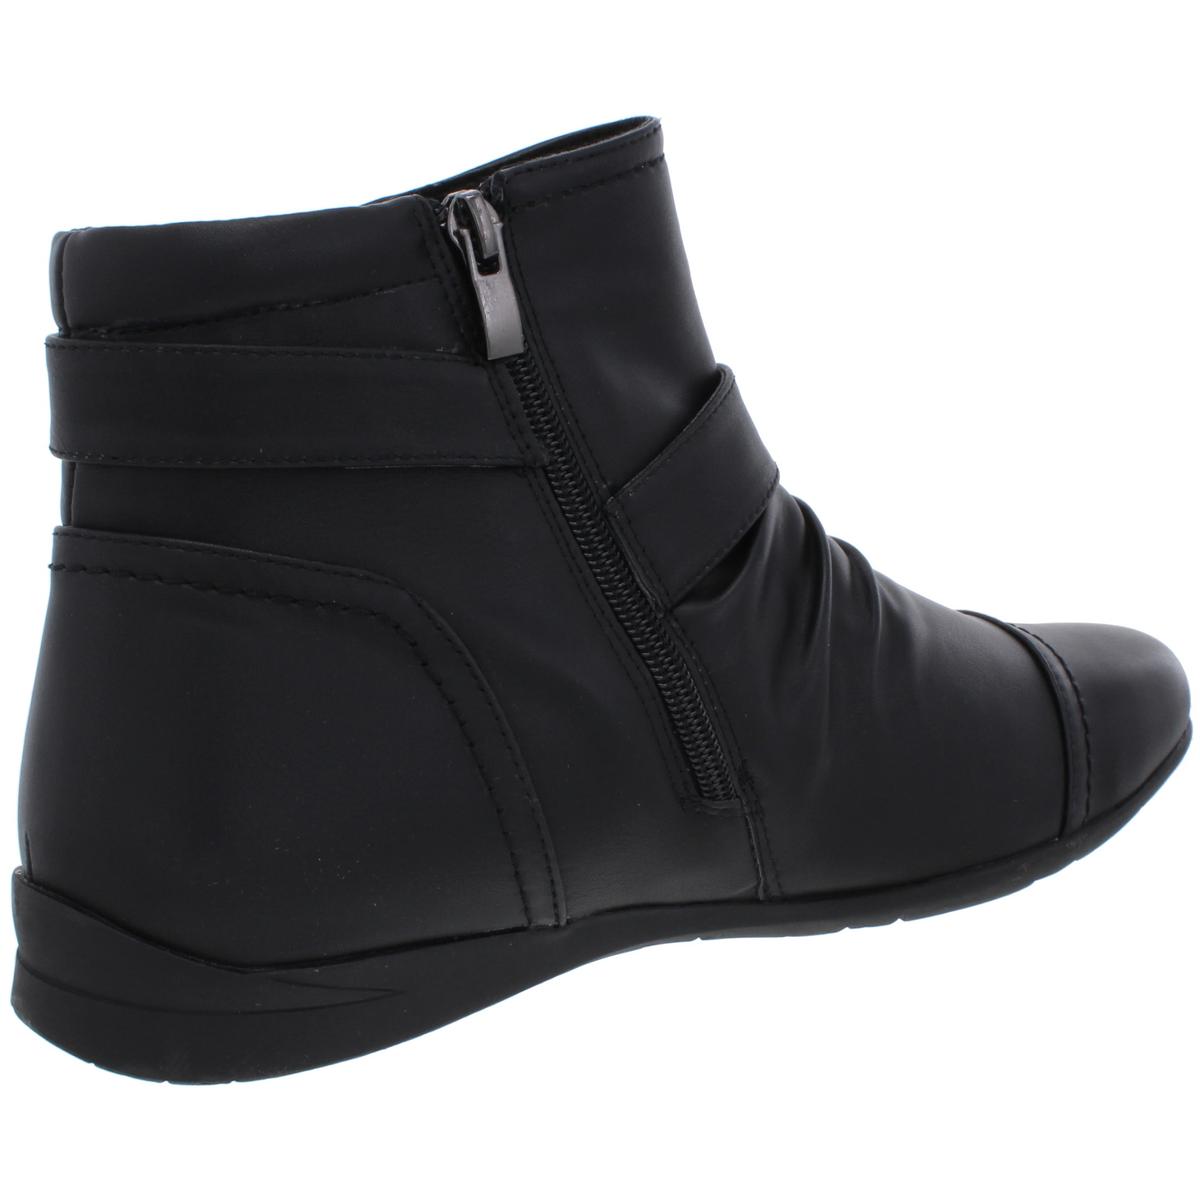 Wanderlust Mandy Womens Buckle Slouchy Ankle Boots